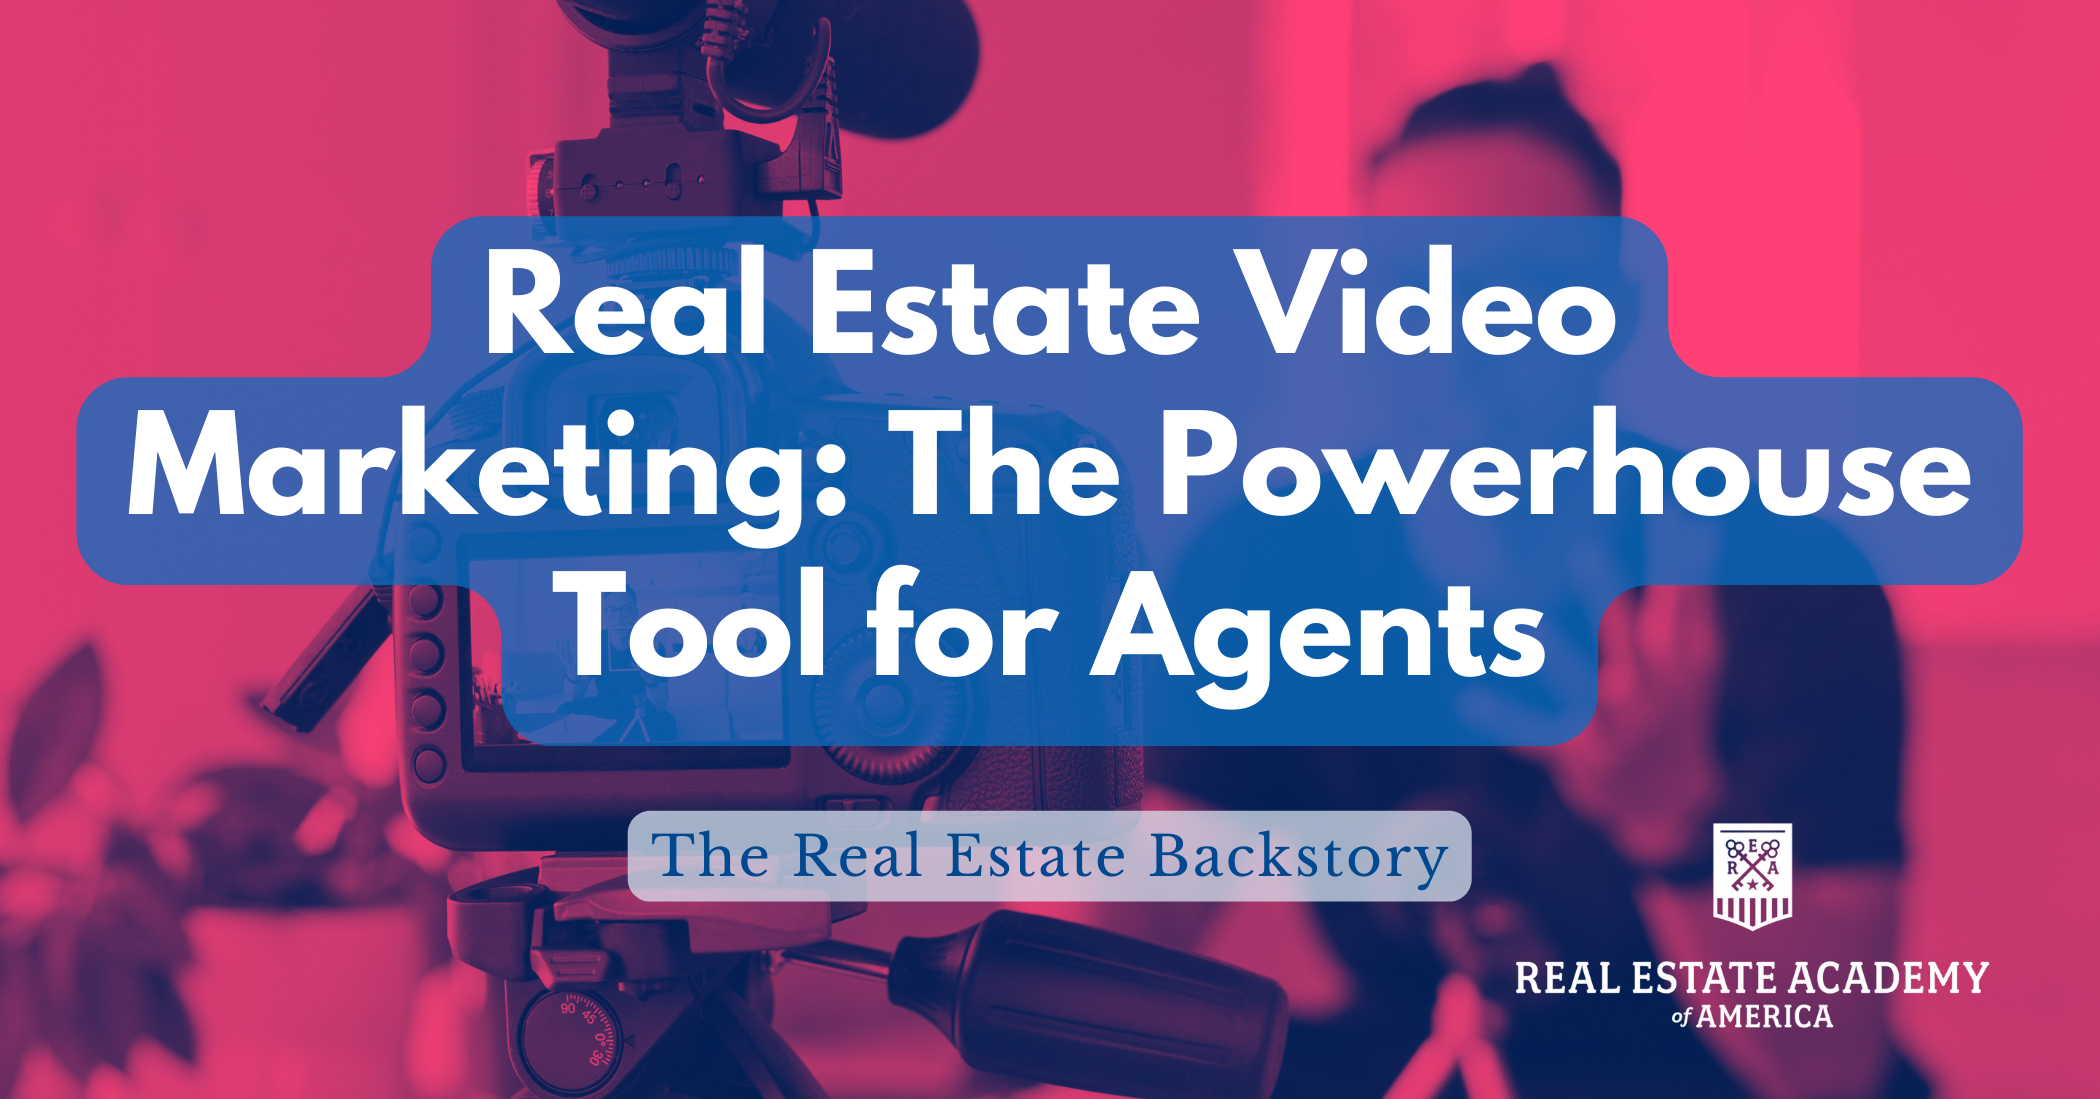 Real Estate Video Marketing: The Powerhouse Tool for Agents